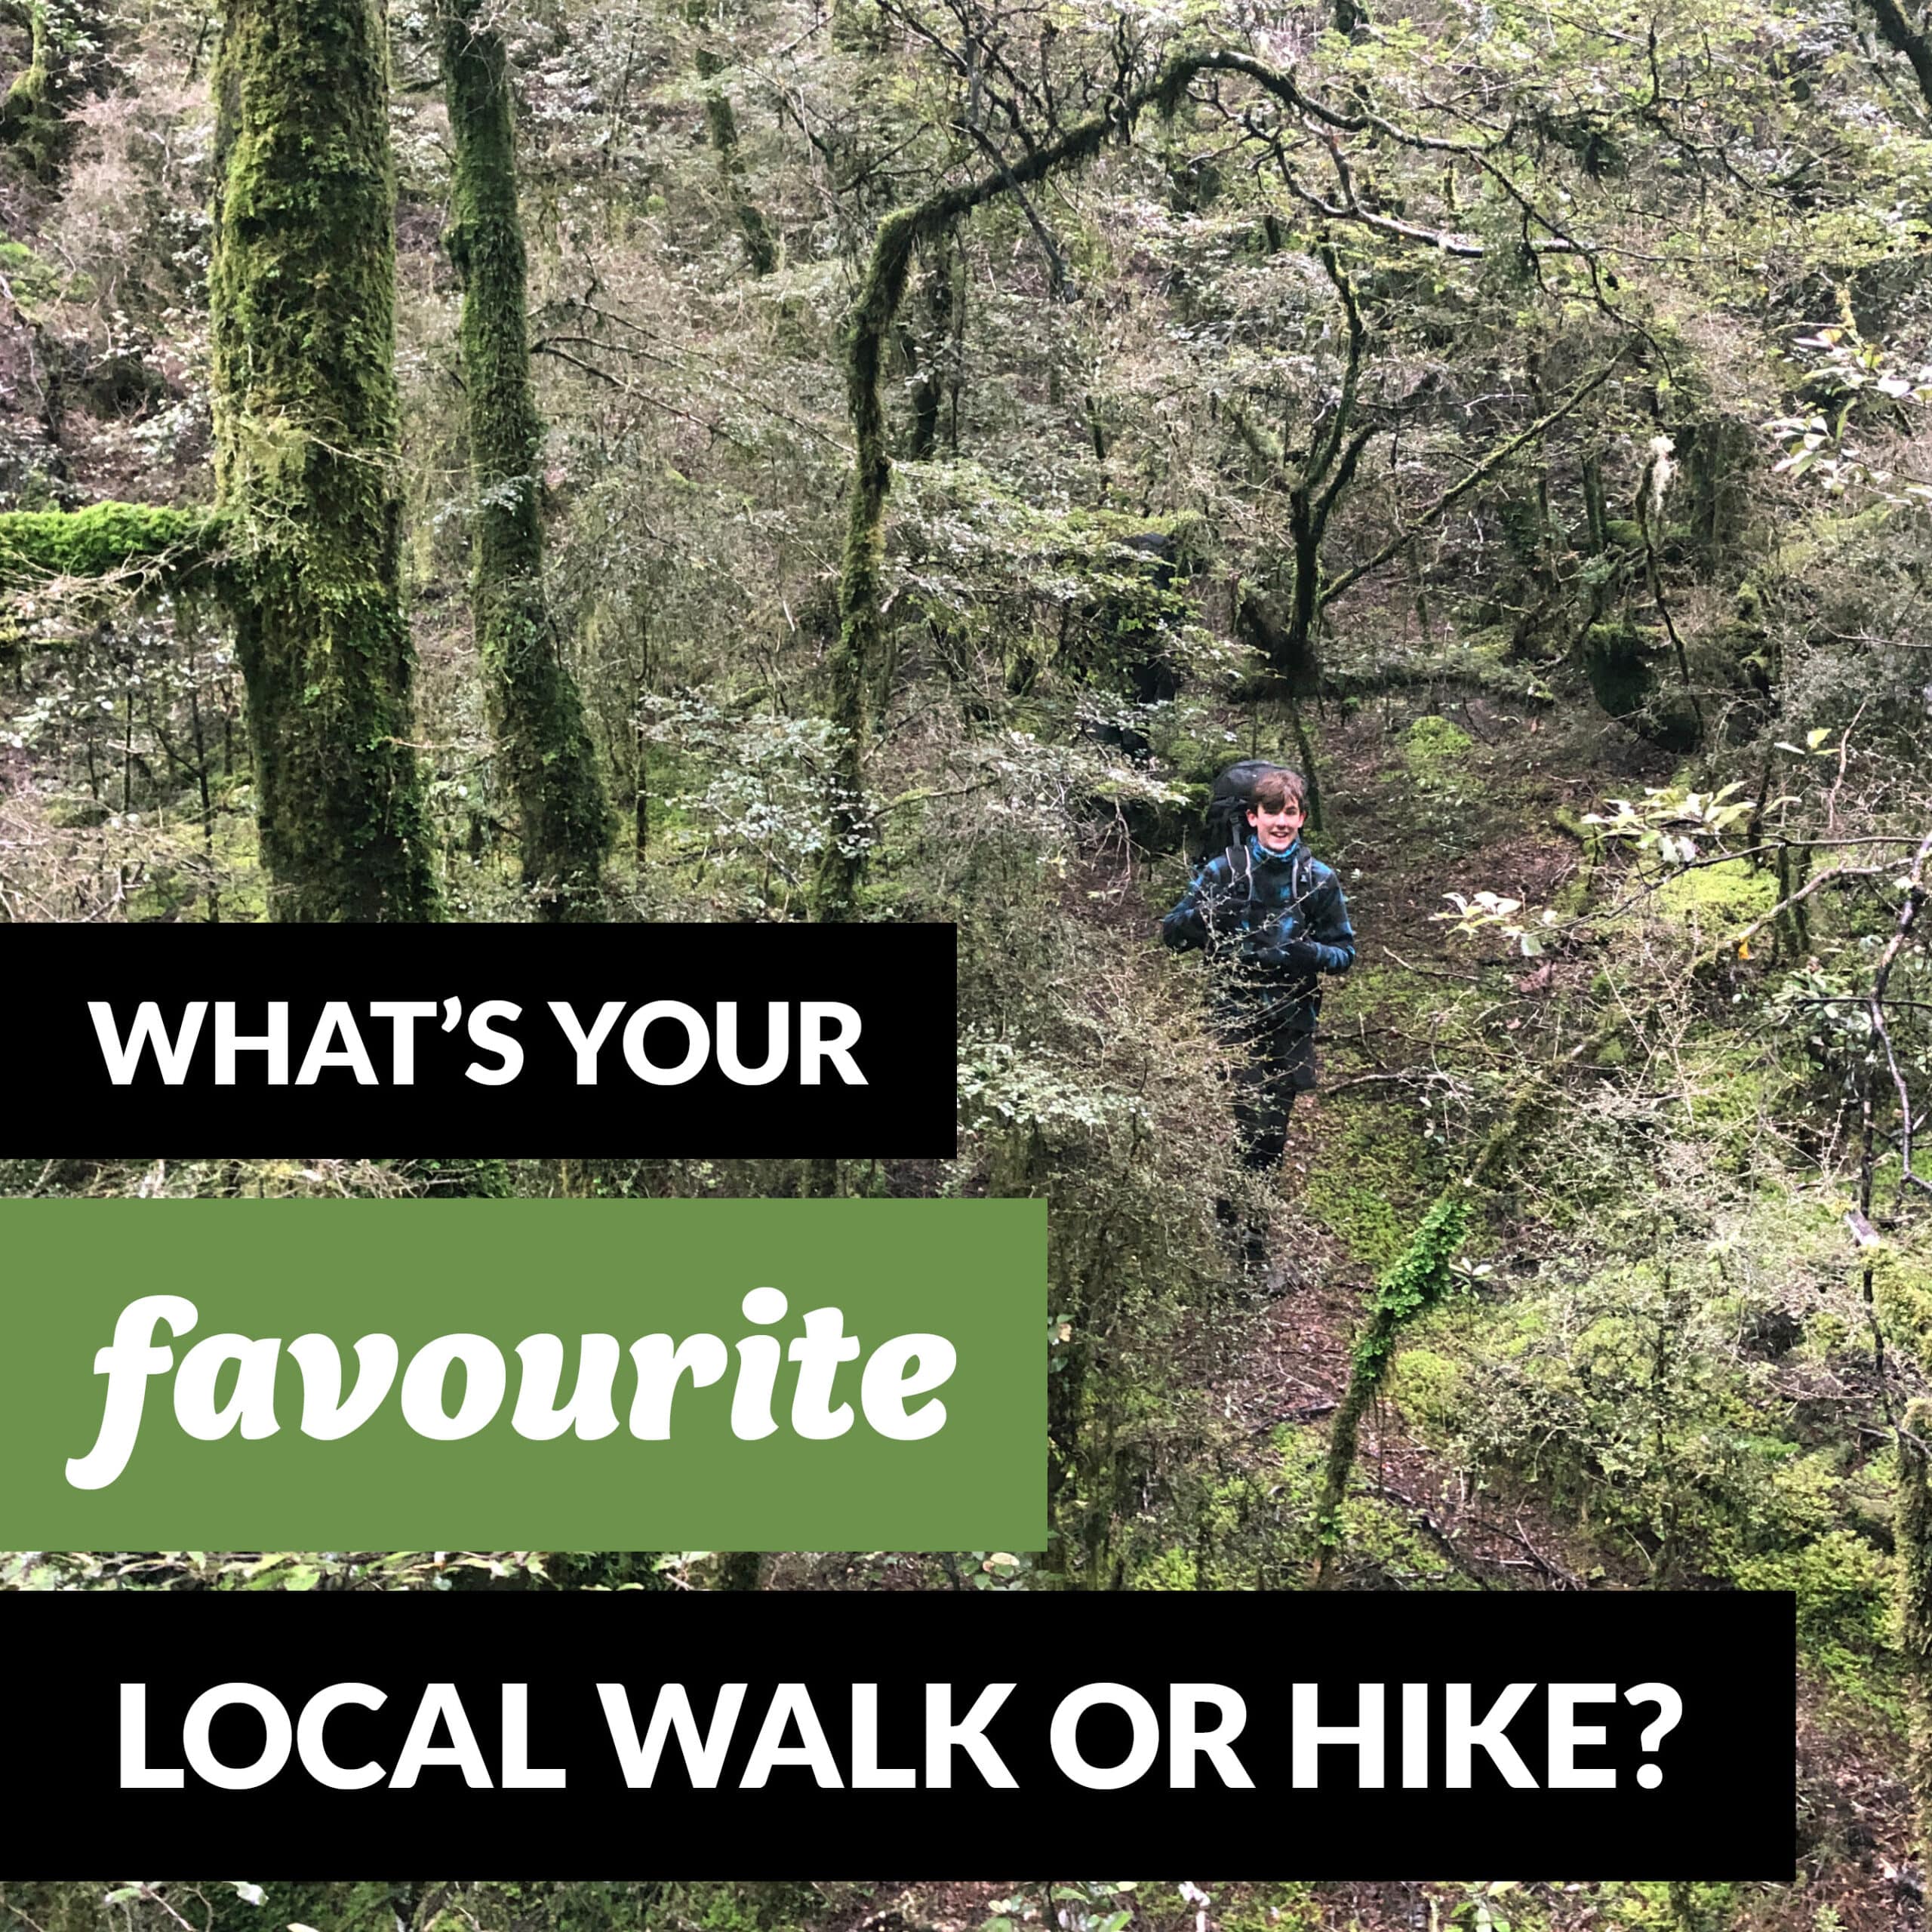 What’s your favourite local walk or hike?